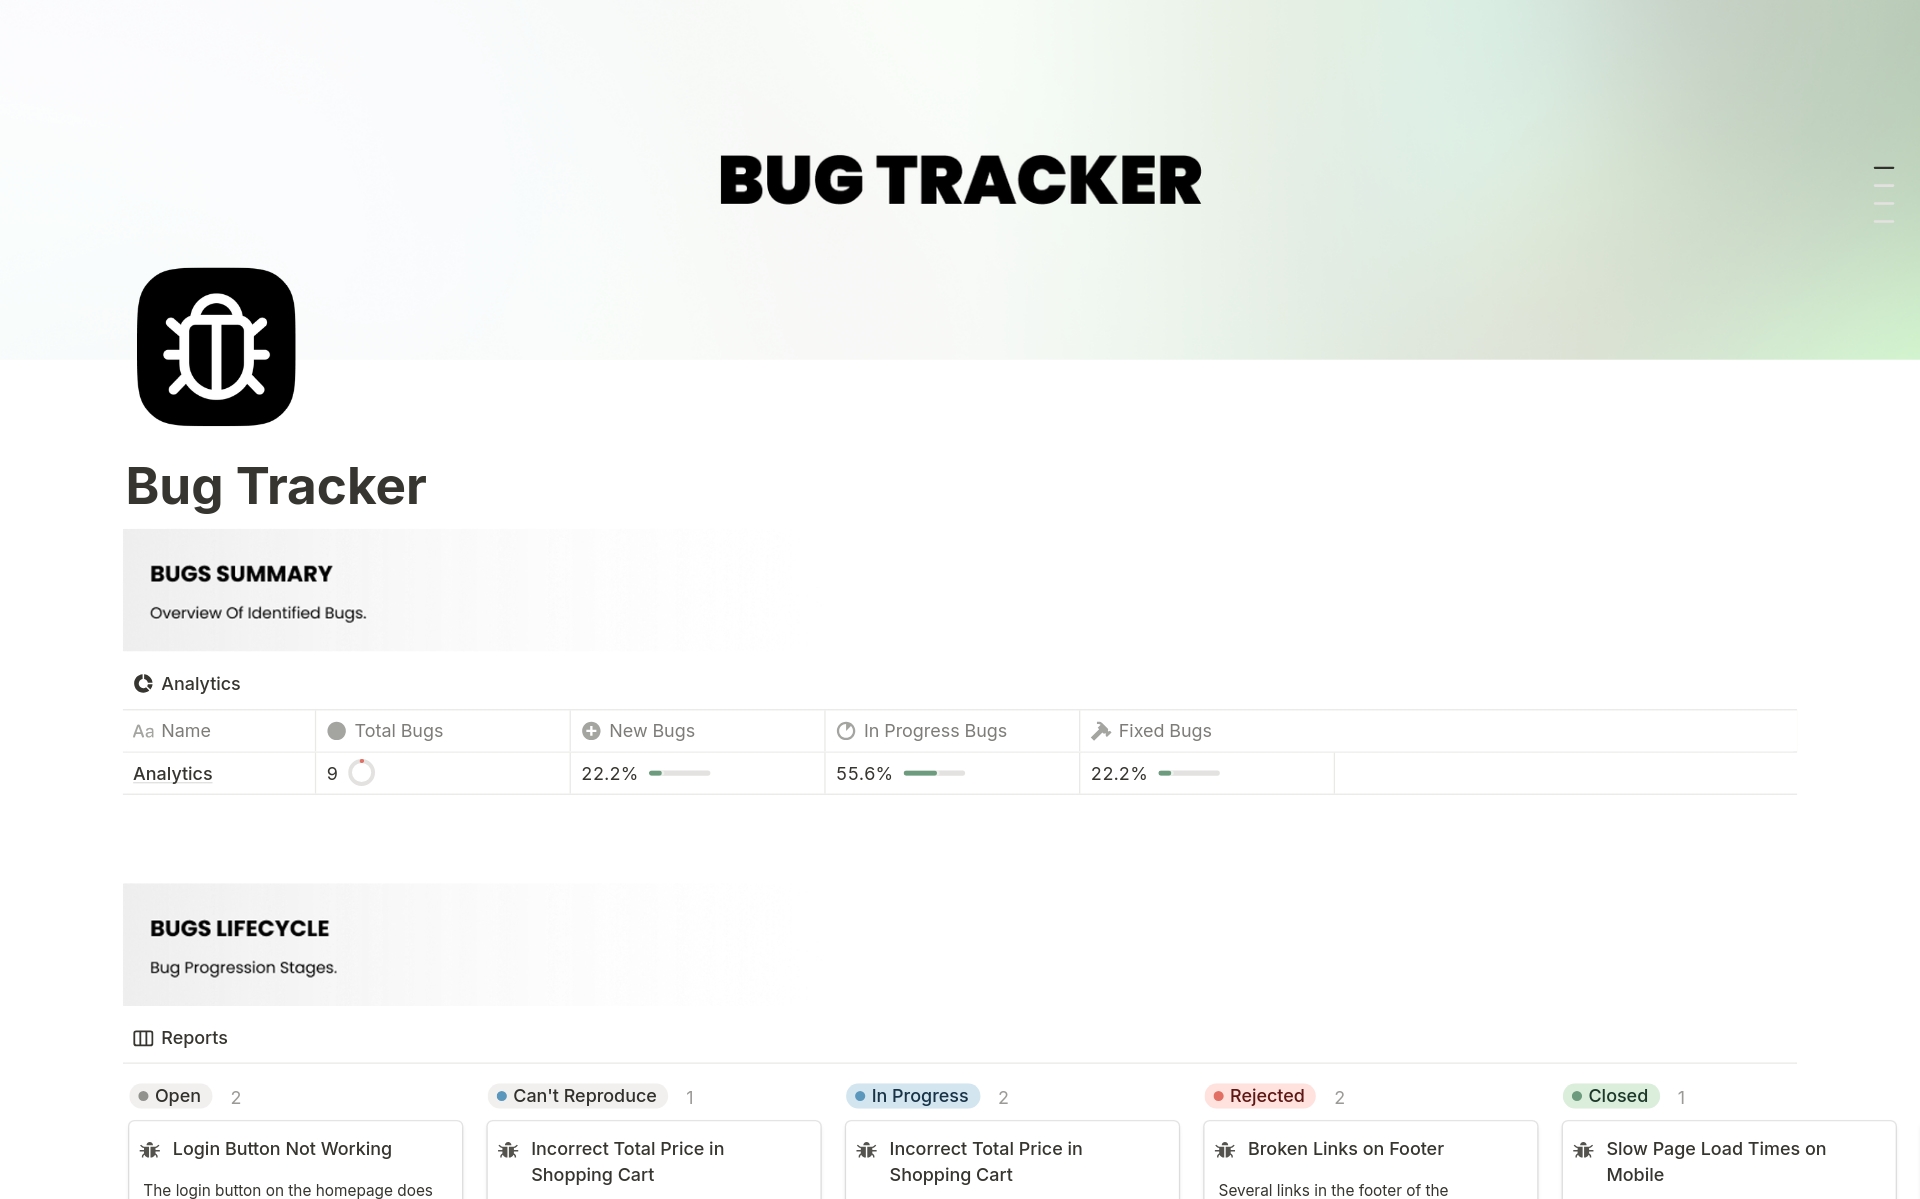 Streamline bug management with our Notion Bug Tracker. Centralize reports, track lifecycles, and boost team collaboration. Get started today!